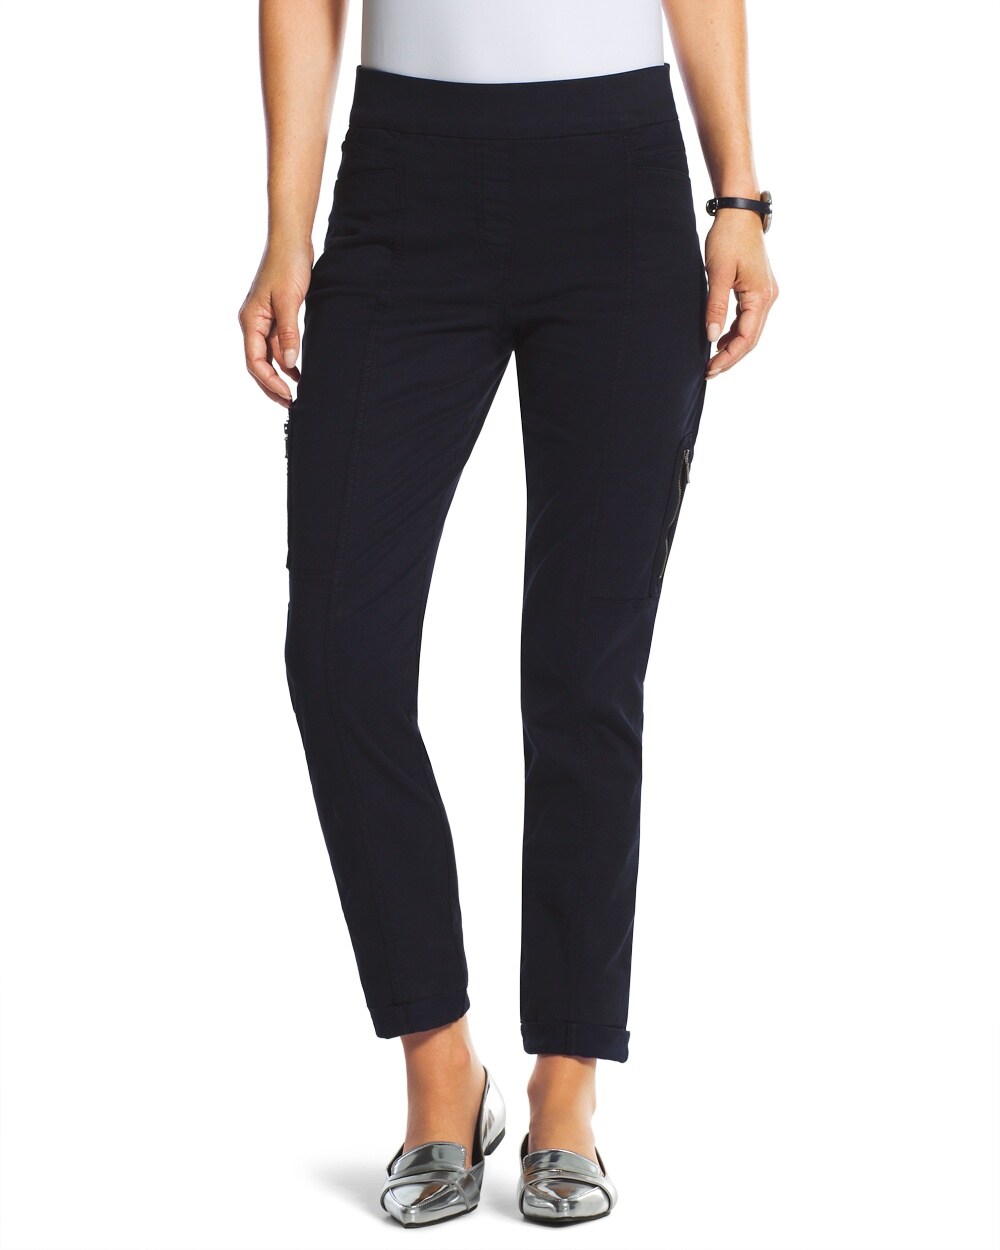 So Slimming Casual Ankle Pants - Chico's